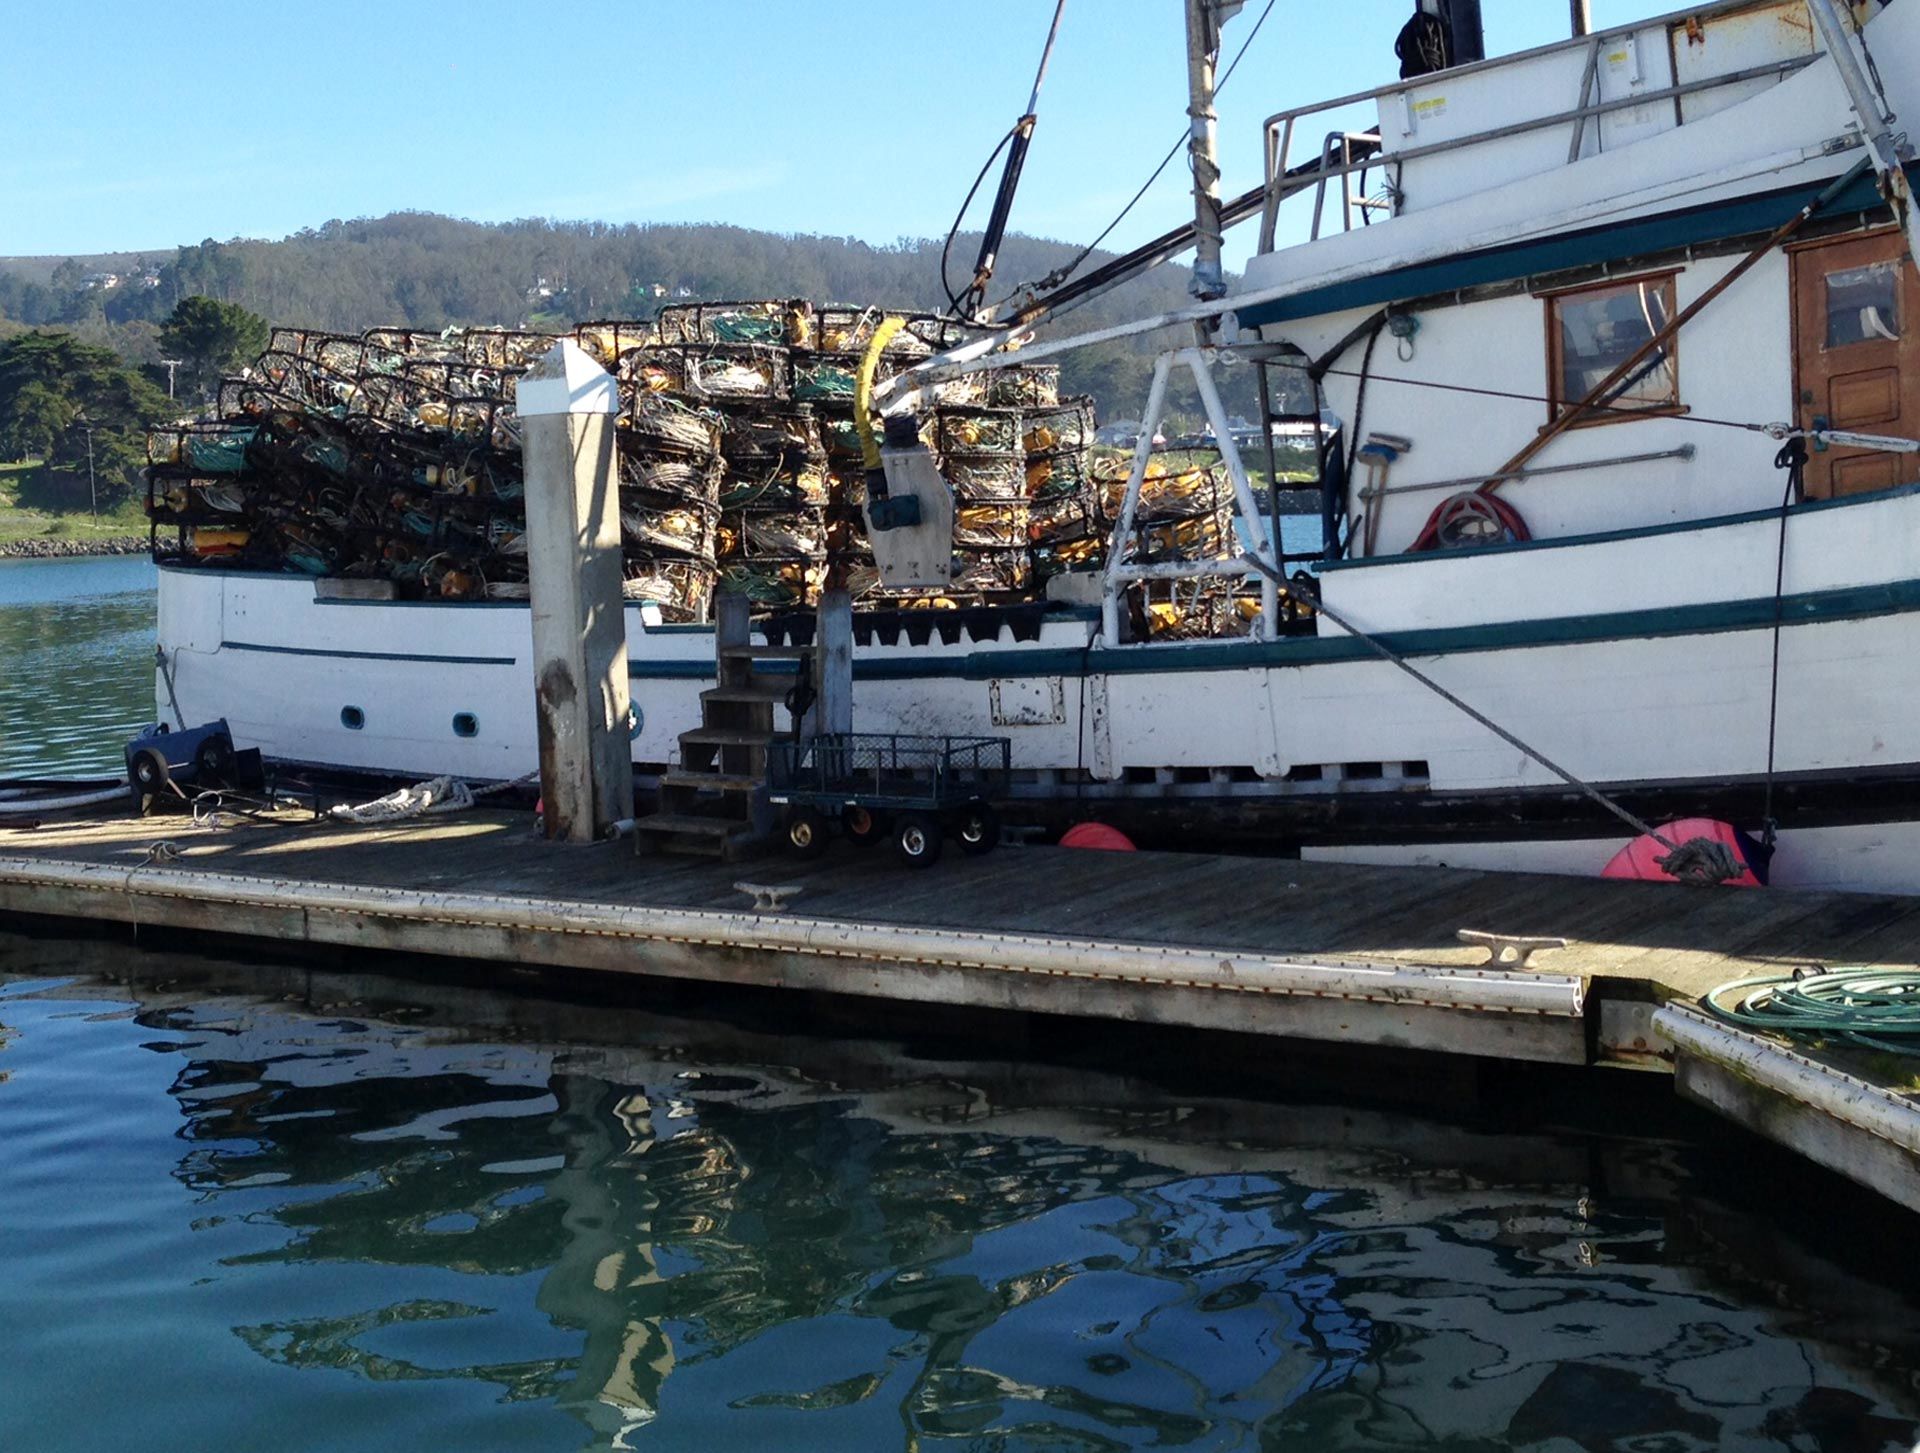 Crab pots sit unused on a fishing boat in Half Moon Bay harbor. Adia White/KQED